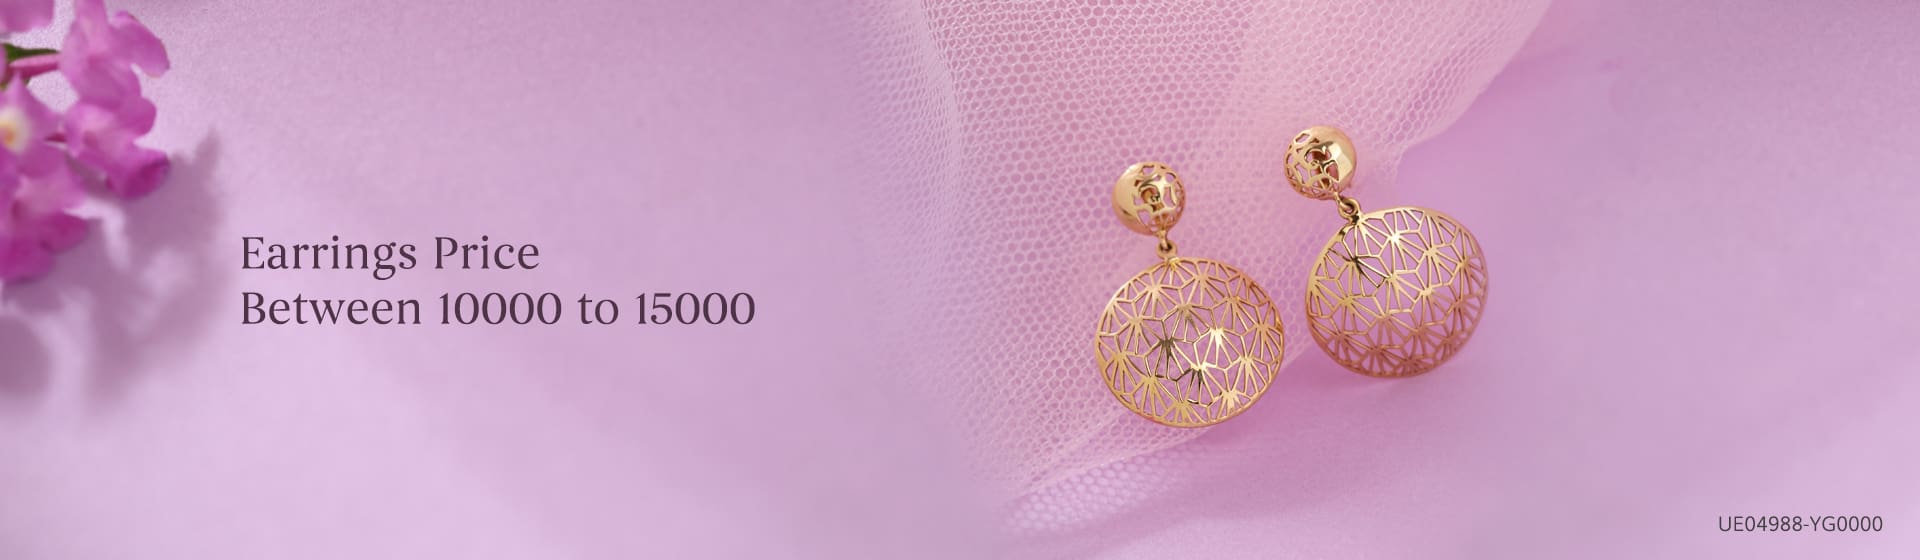 Shop Gold and Diamond Earrings Price Between 5000 to 10000 Online